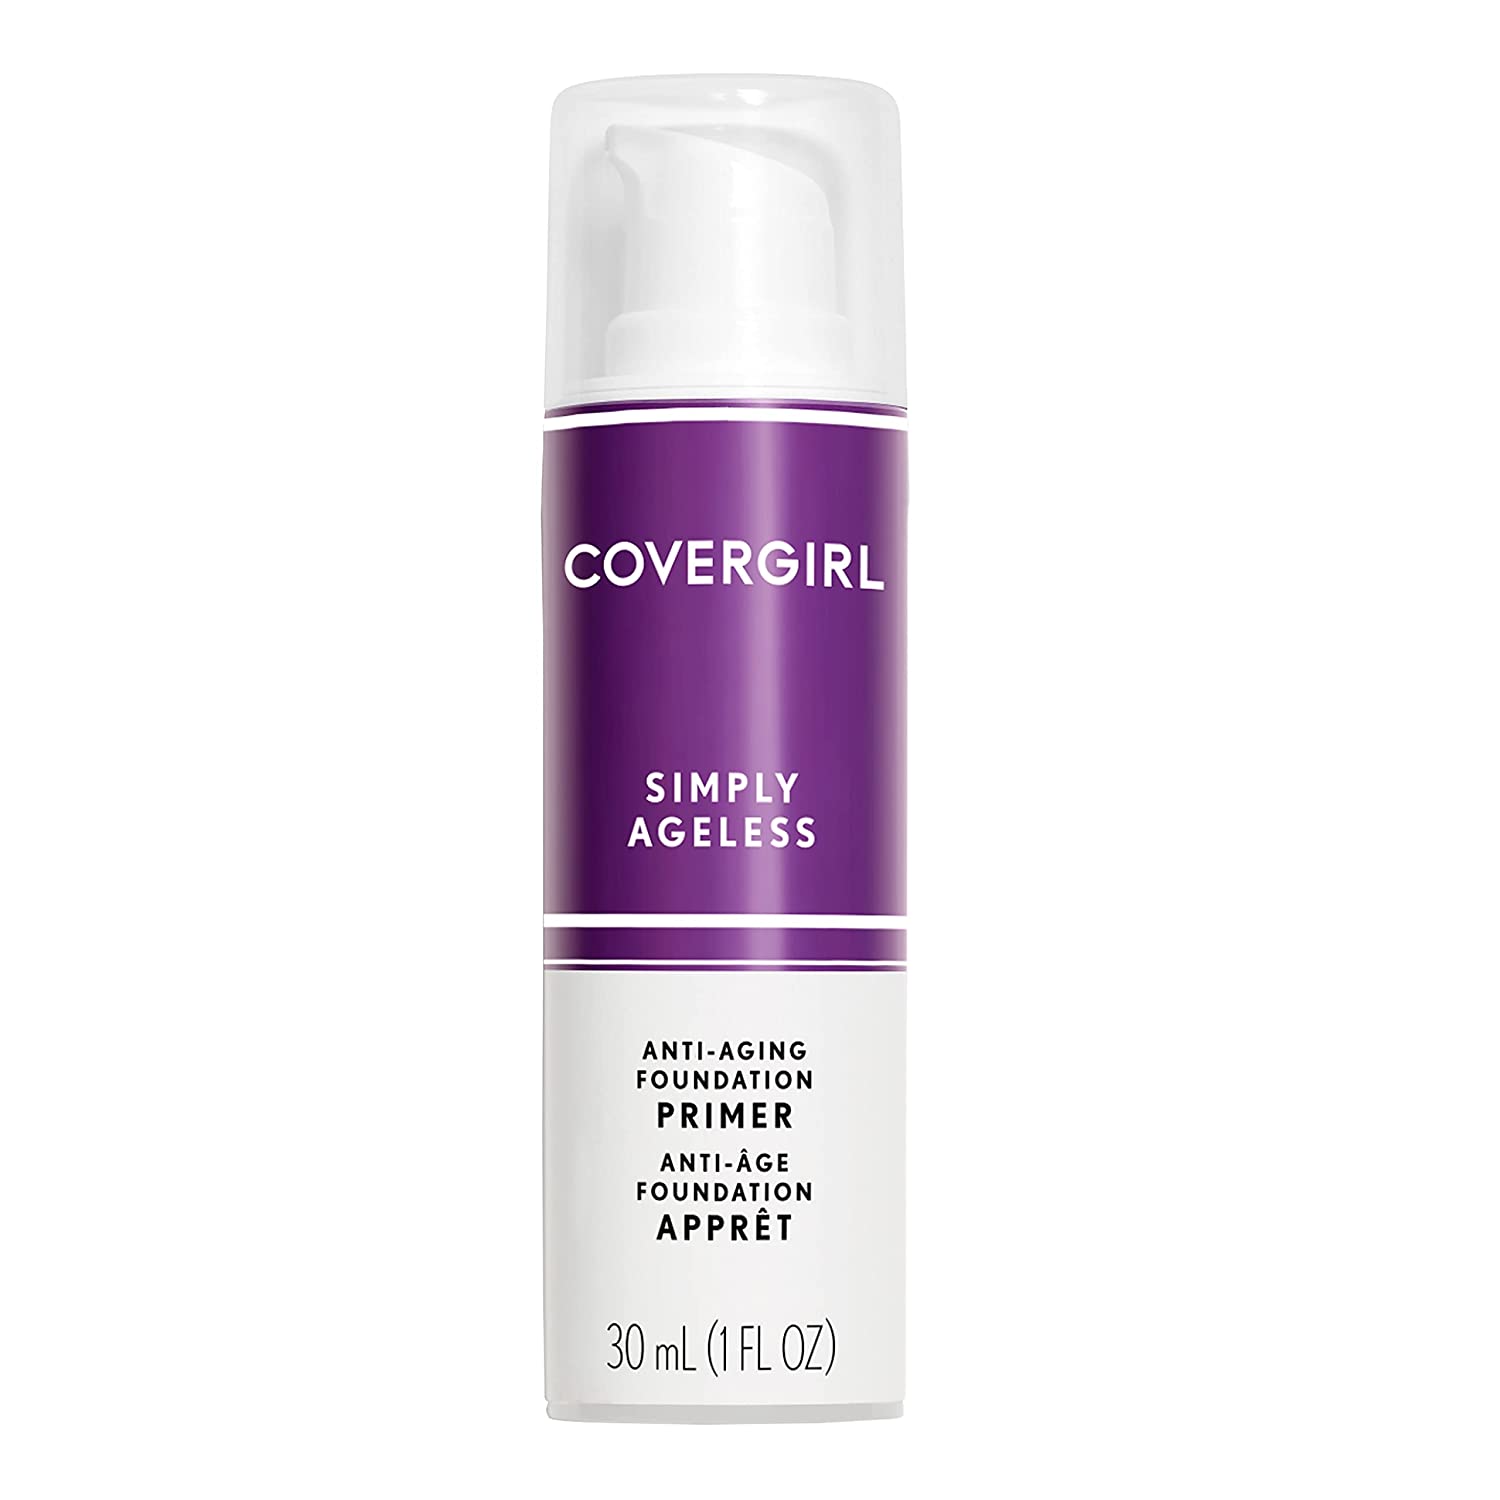 COVERGIRL Simply Ageless Anti-Aging Face Primer